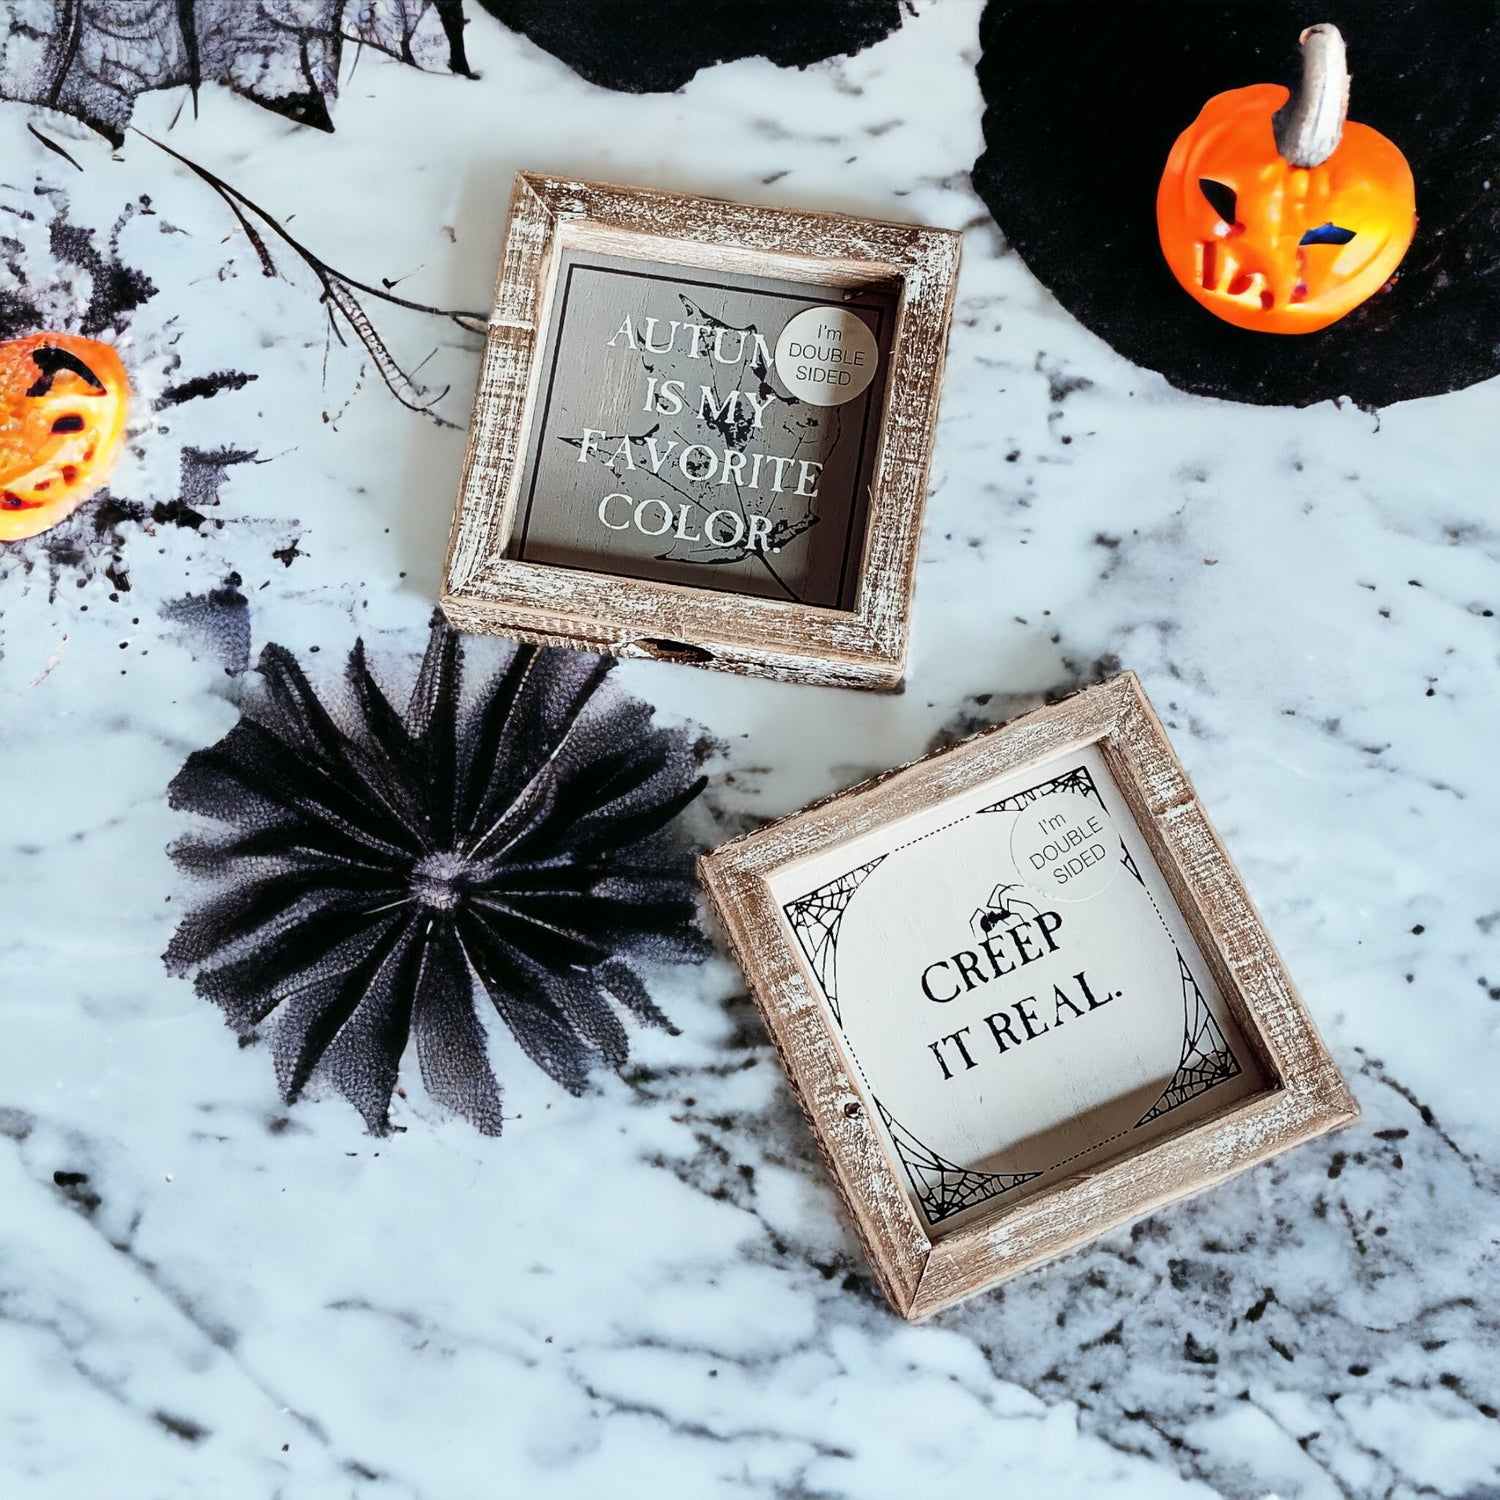 Cottage Halloween Home Decorations Unique double sided